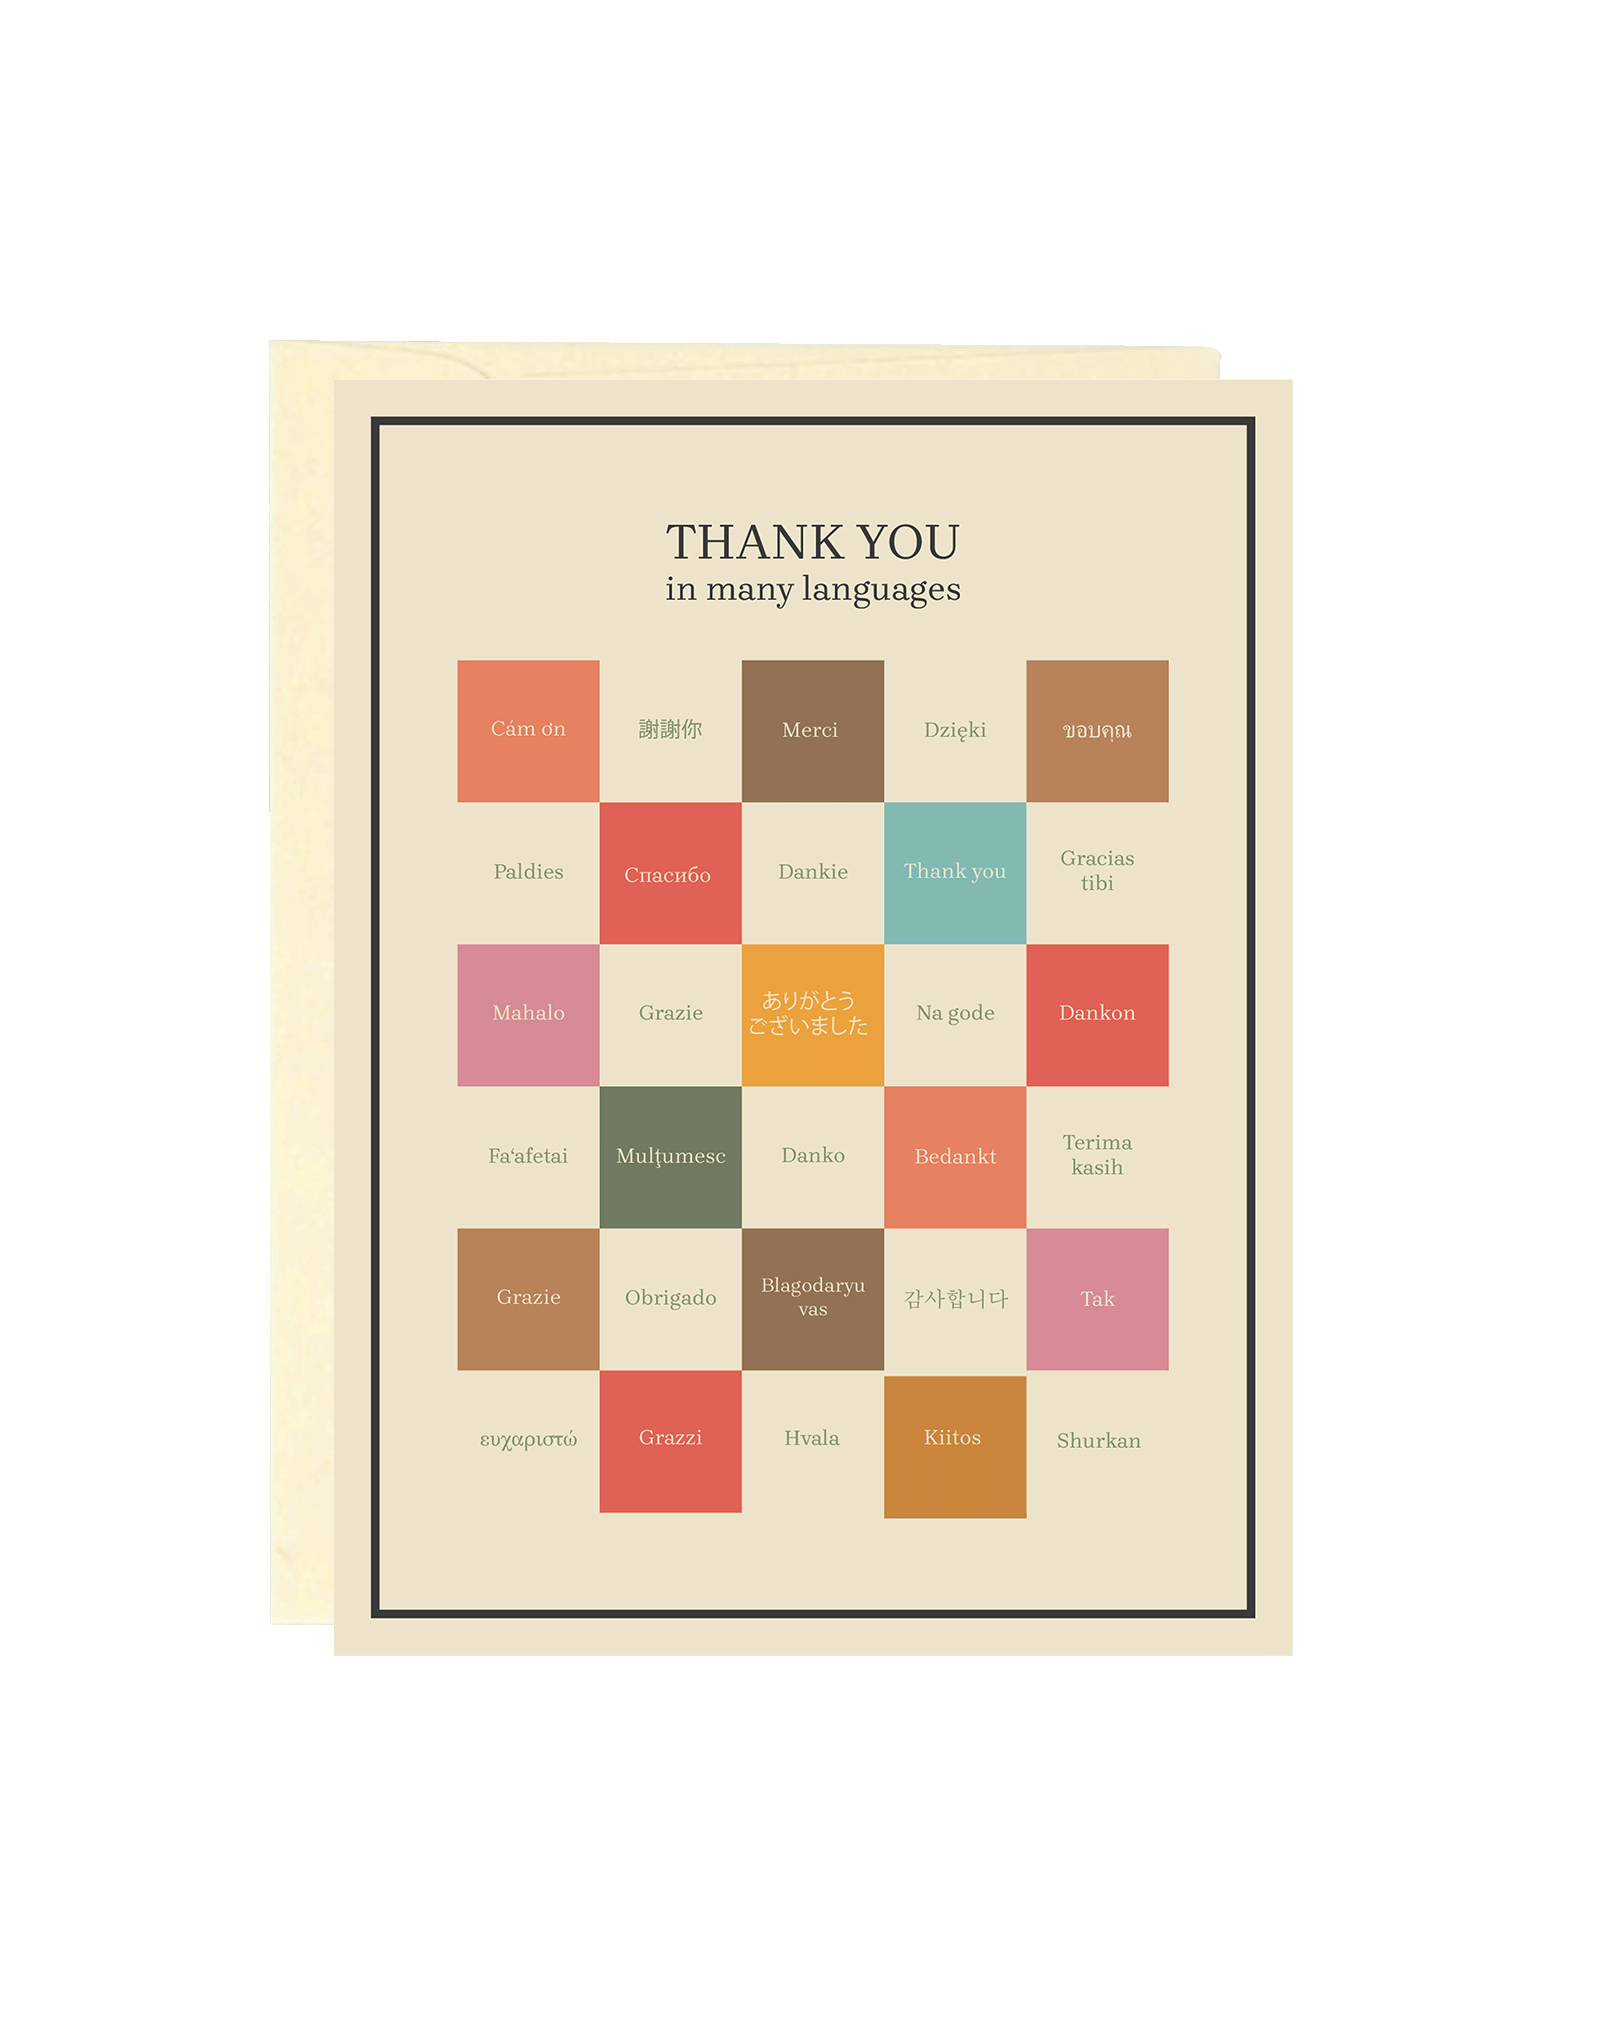 THANK YOU CARD - "Thank You" in Many Languages